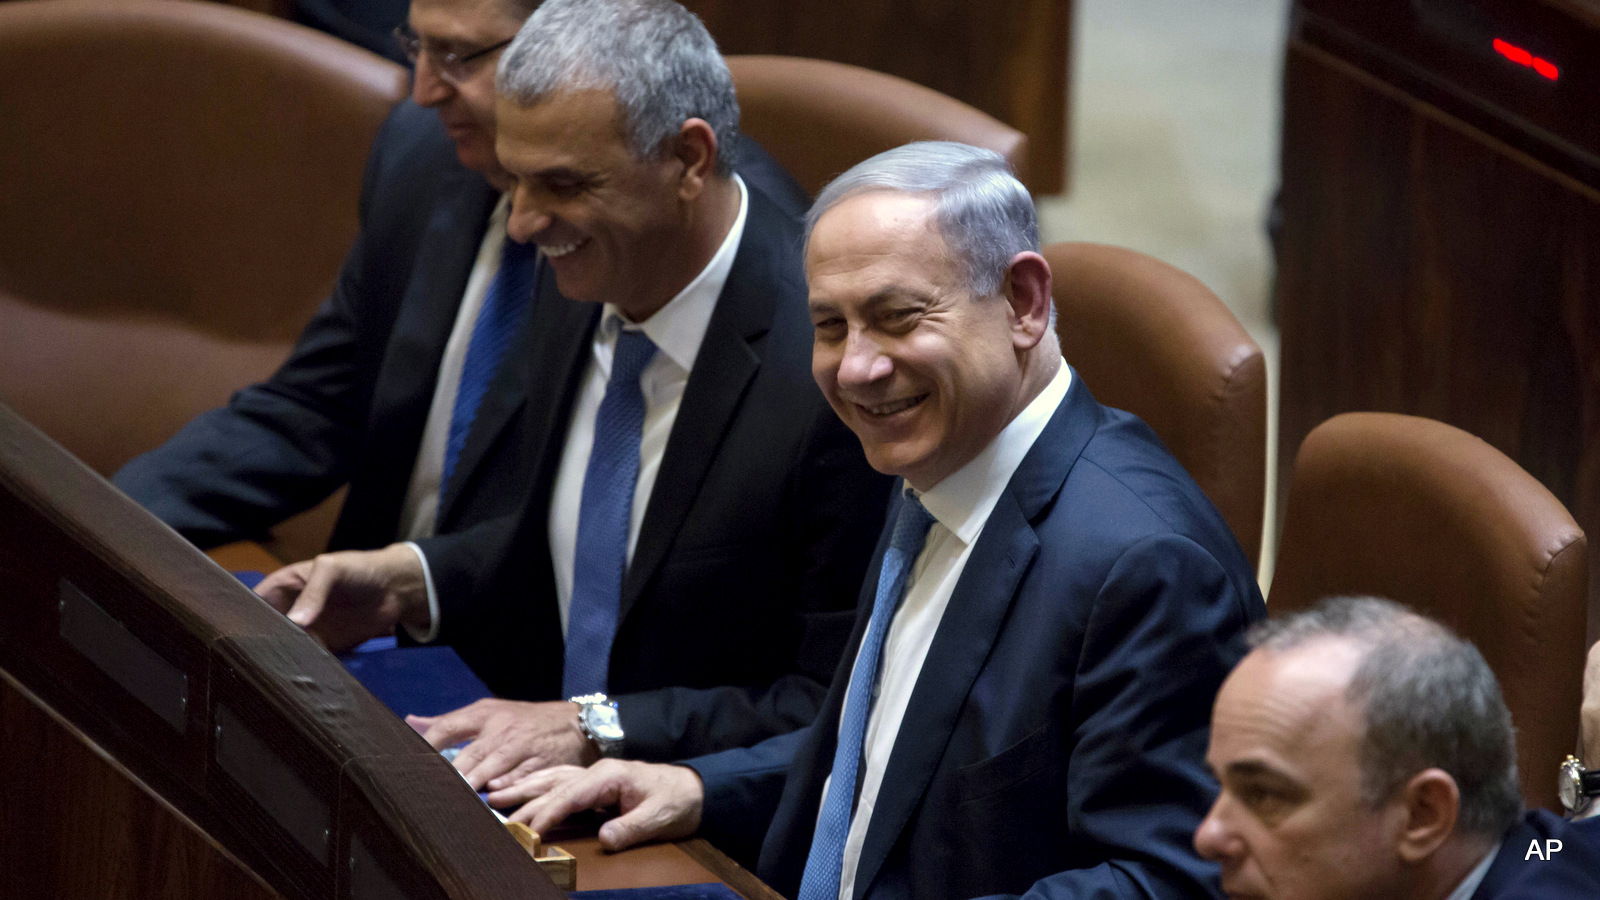 Israeli Prime Minister Benjamin Netanyahu, second right, heads the new government as ministers take their place including Defense Minister Moshe Ya'alon, left, and Moshe Kahlon, Housing Minister, second left, as the prime minister fills cabinet posts at the last minute forming the 34th government of Israel, two months after the mid-March general elections.